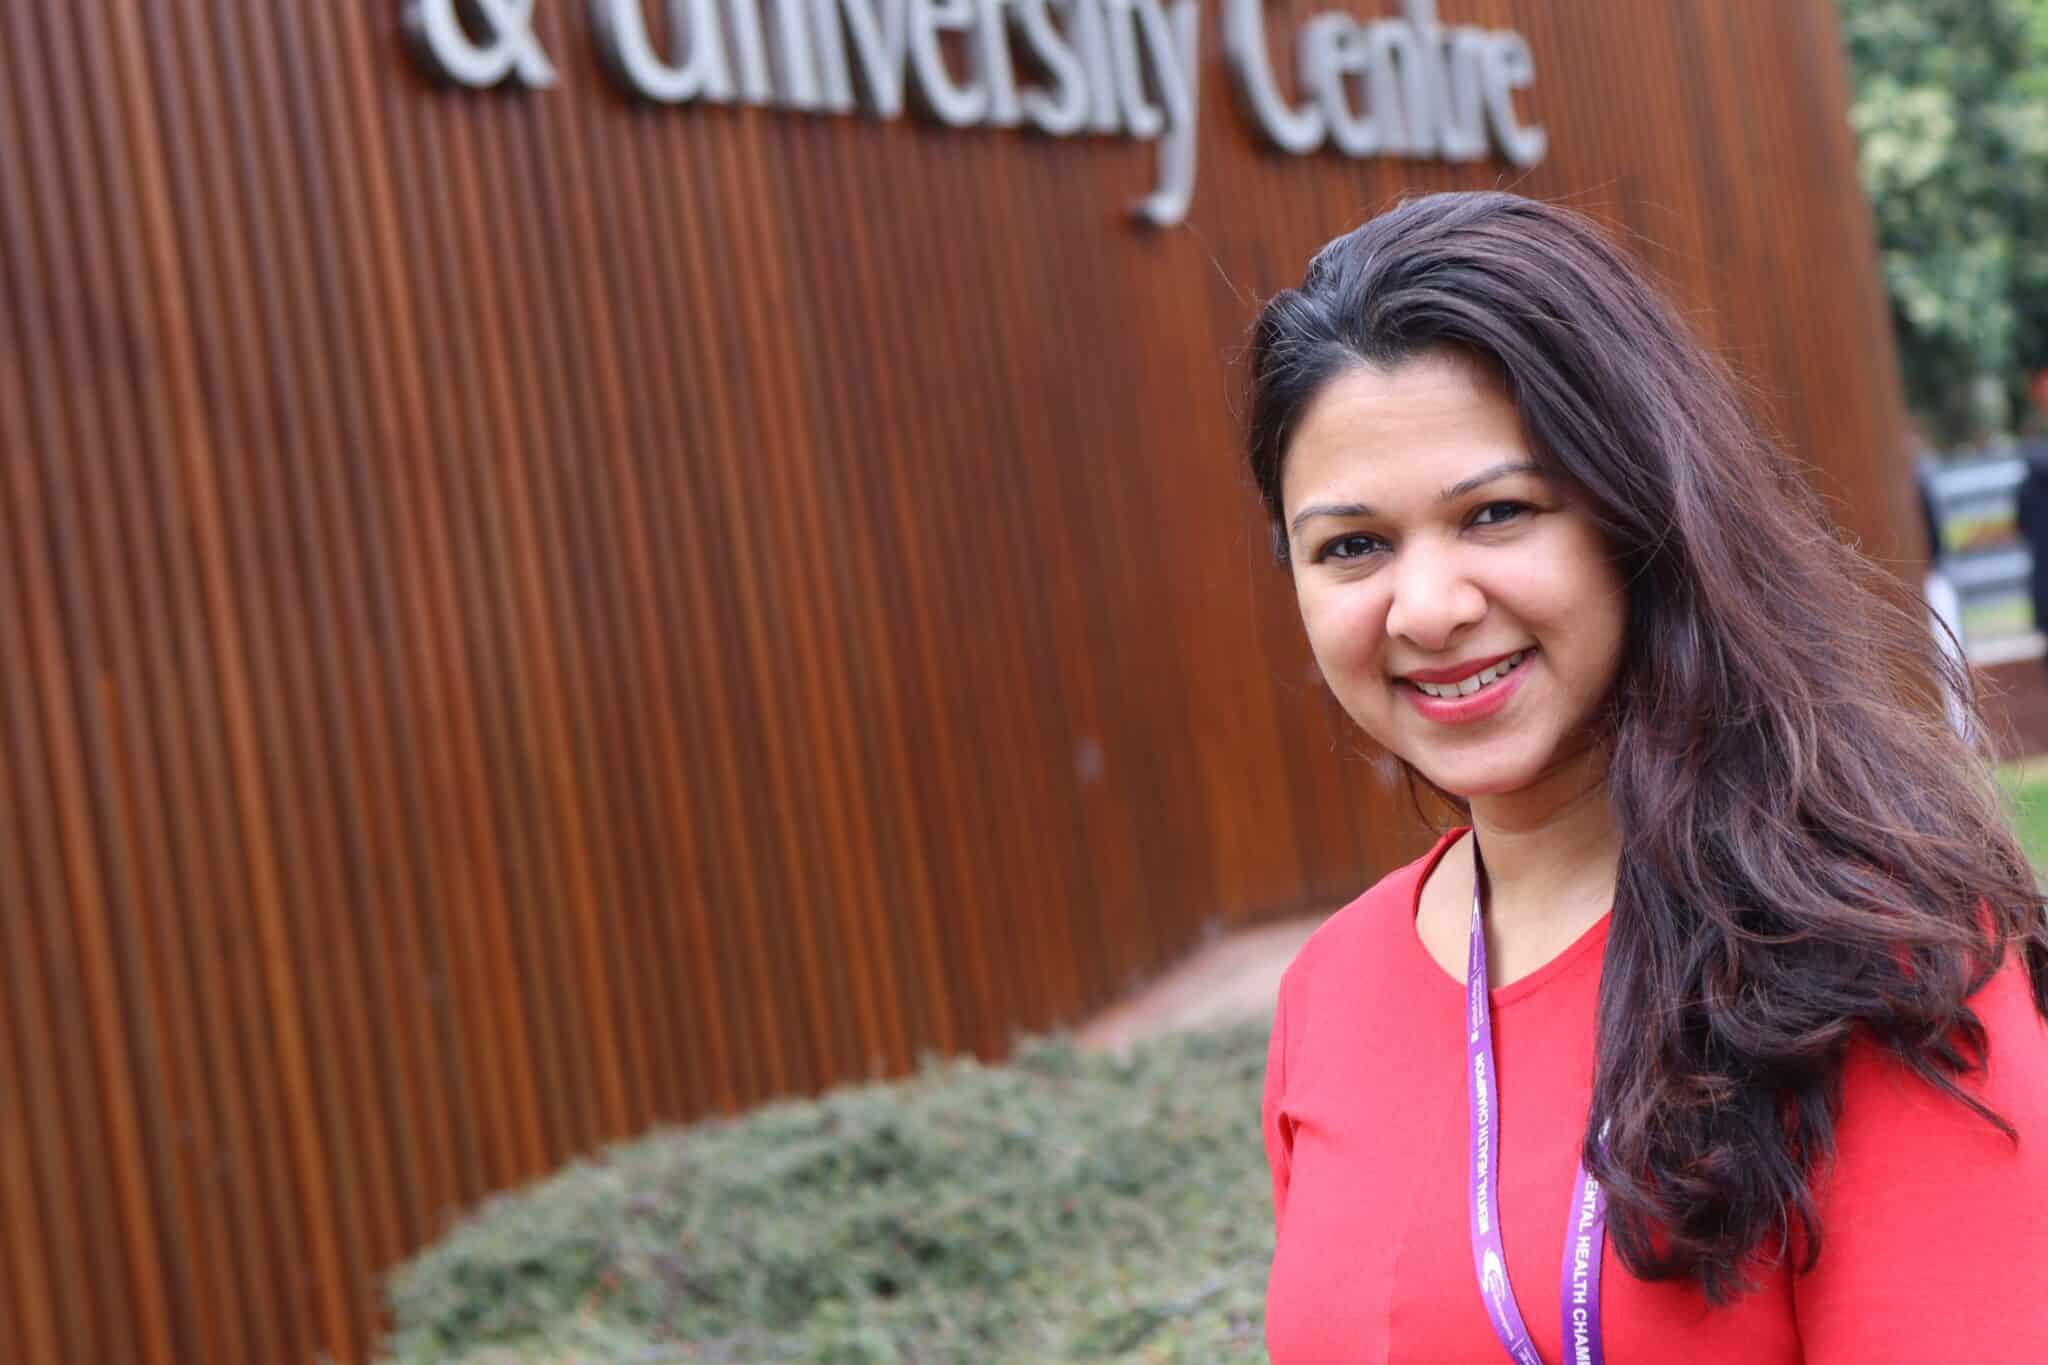 Fathima in front of College in red top